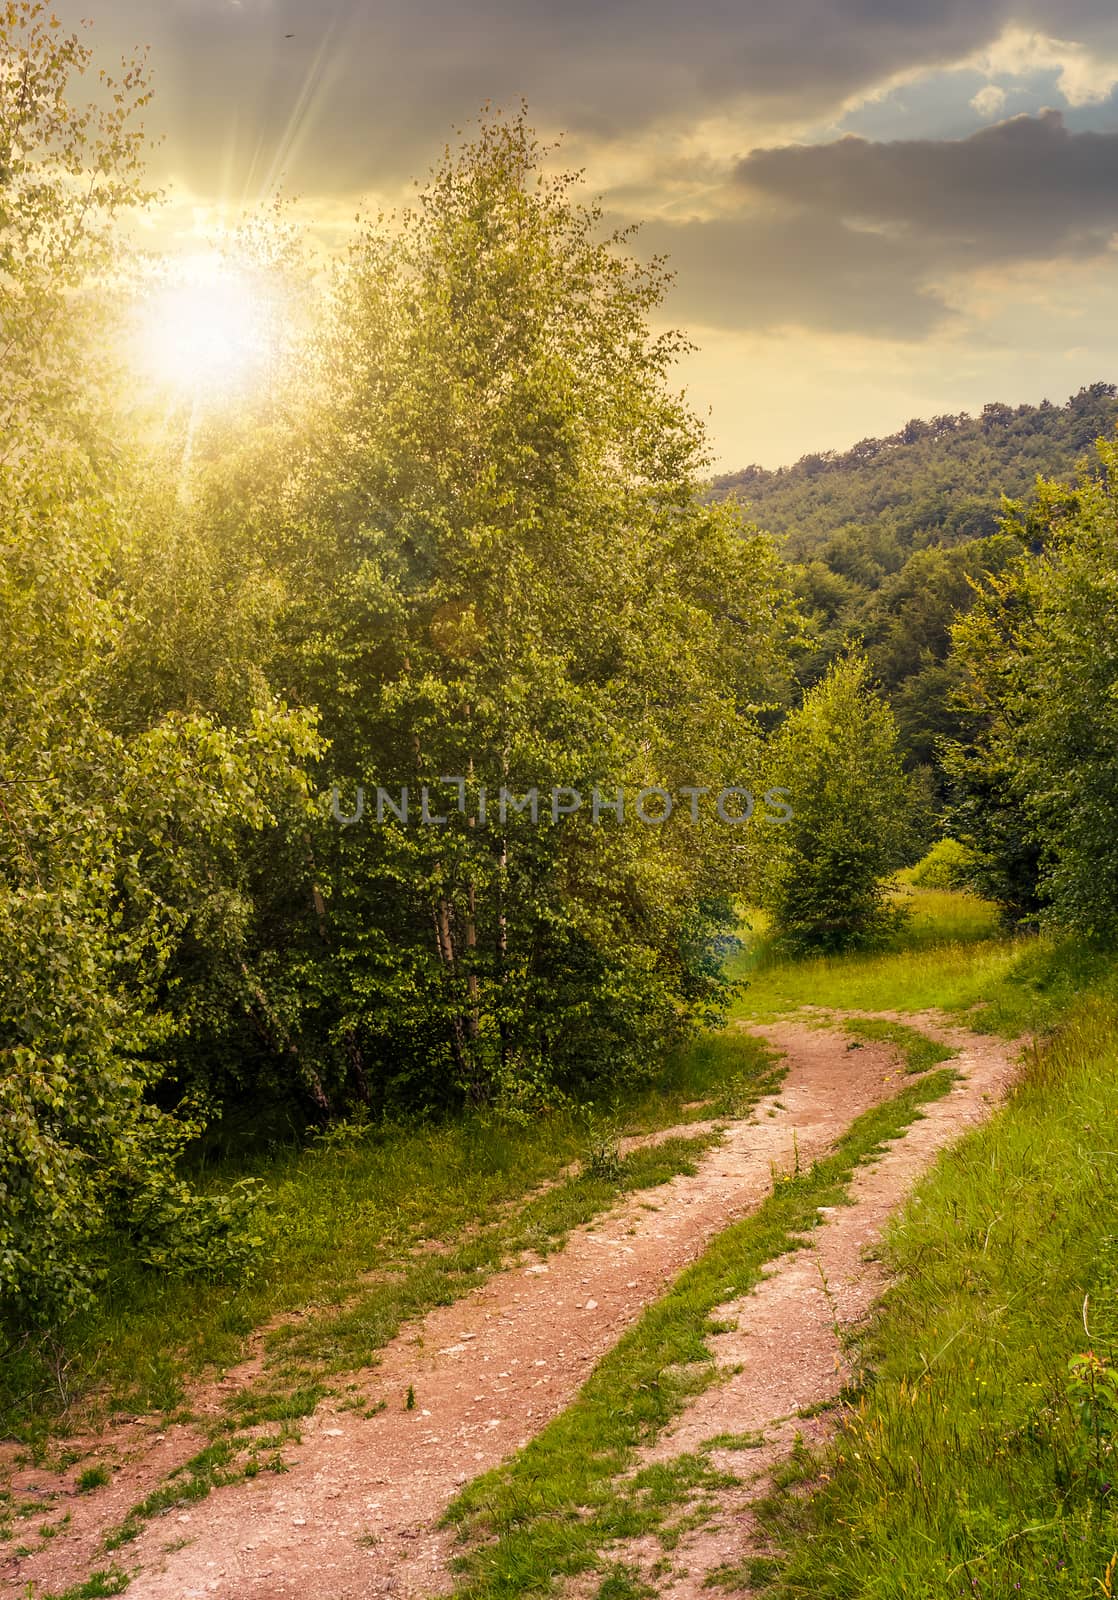 forest road among tall trees with green foliage. beautiful nature scenery in springtime